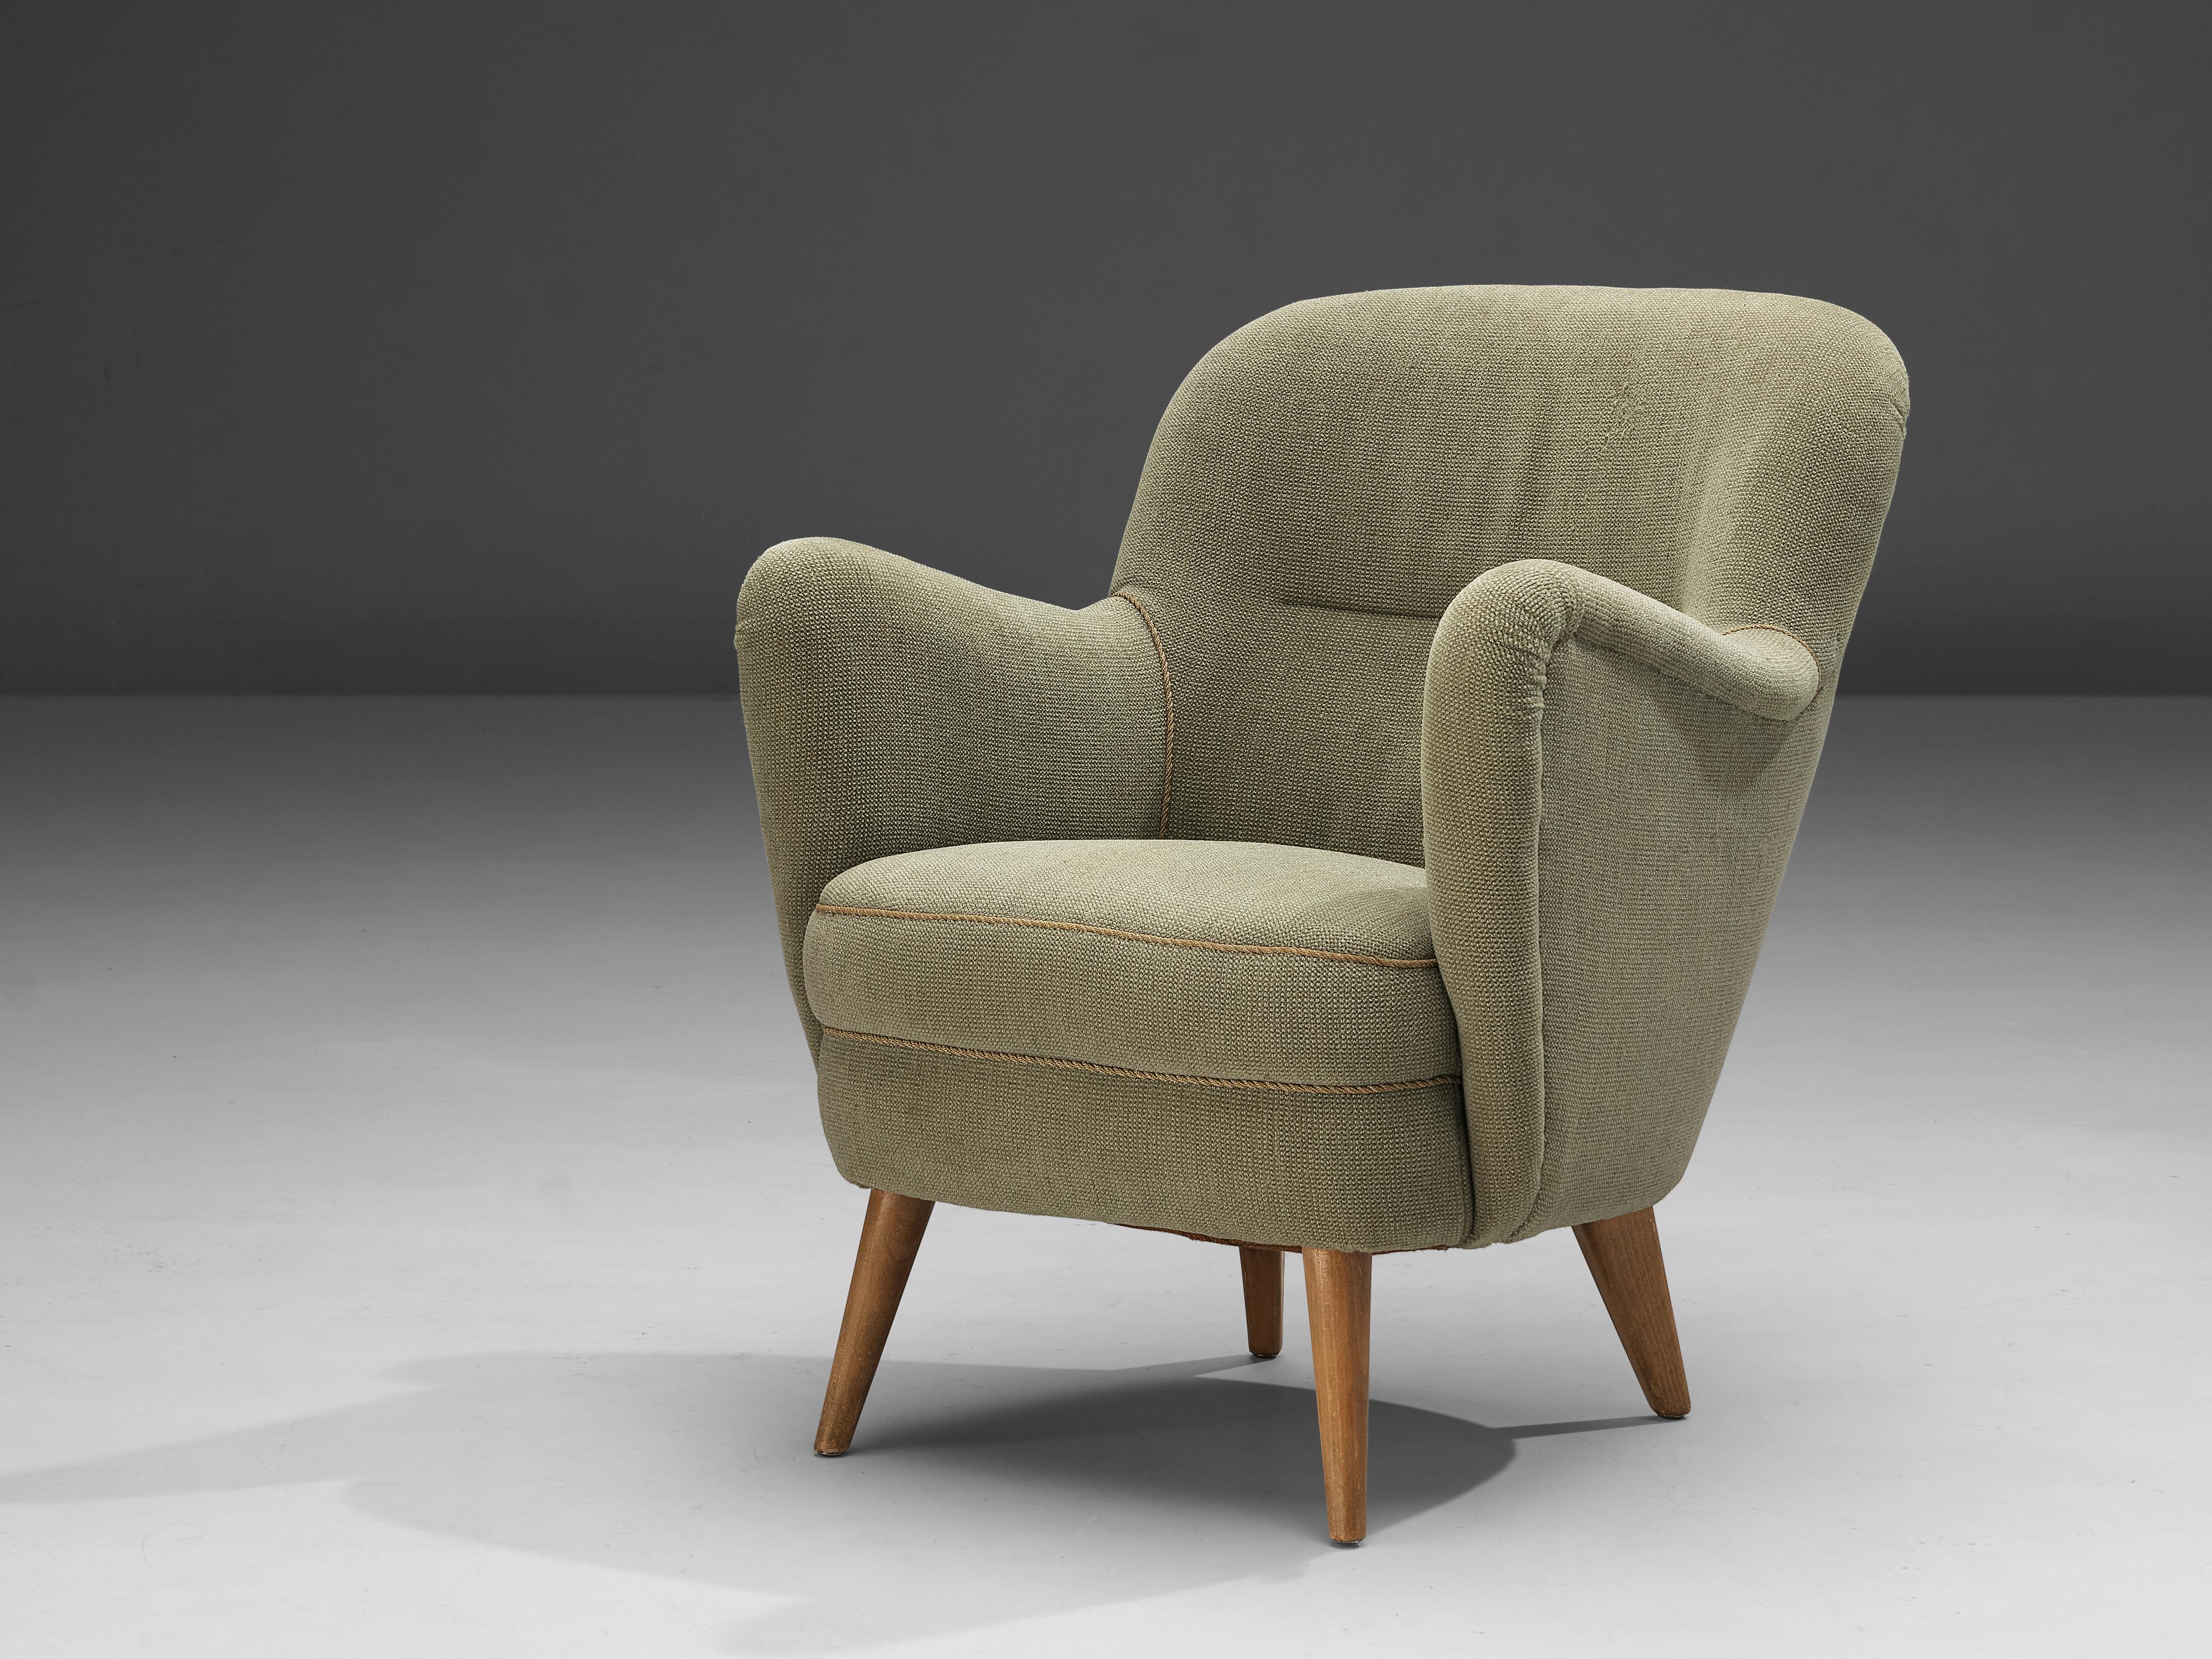 Lounge chair, beech, fabric, Denmark, 1950s. 

A sophisticated Danish easy chair with beech legs. The sleek, tapered beech legs form a nice interplay with the elegant body of this chair. The round back and armrest create an inviting feeling. The